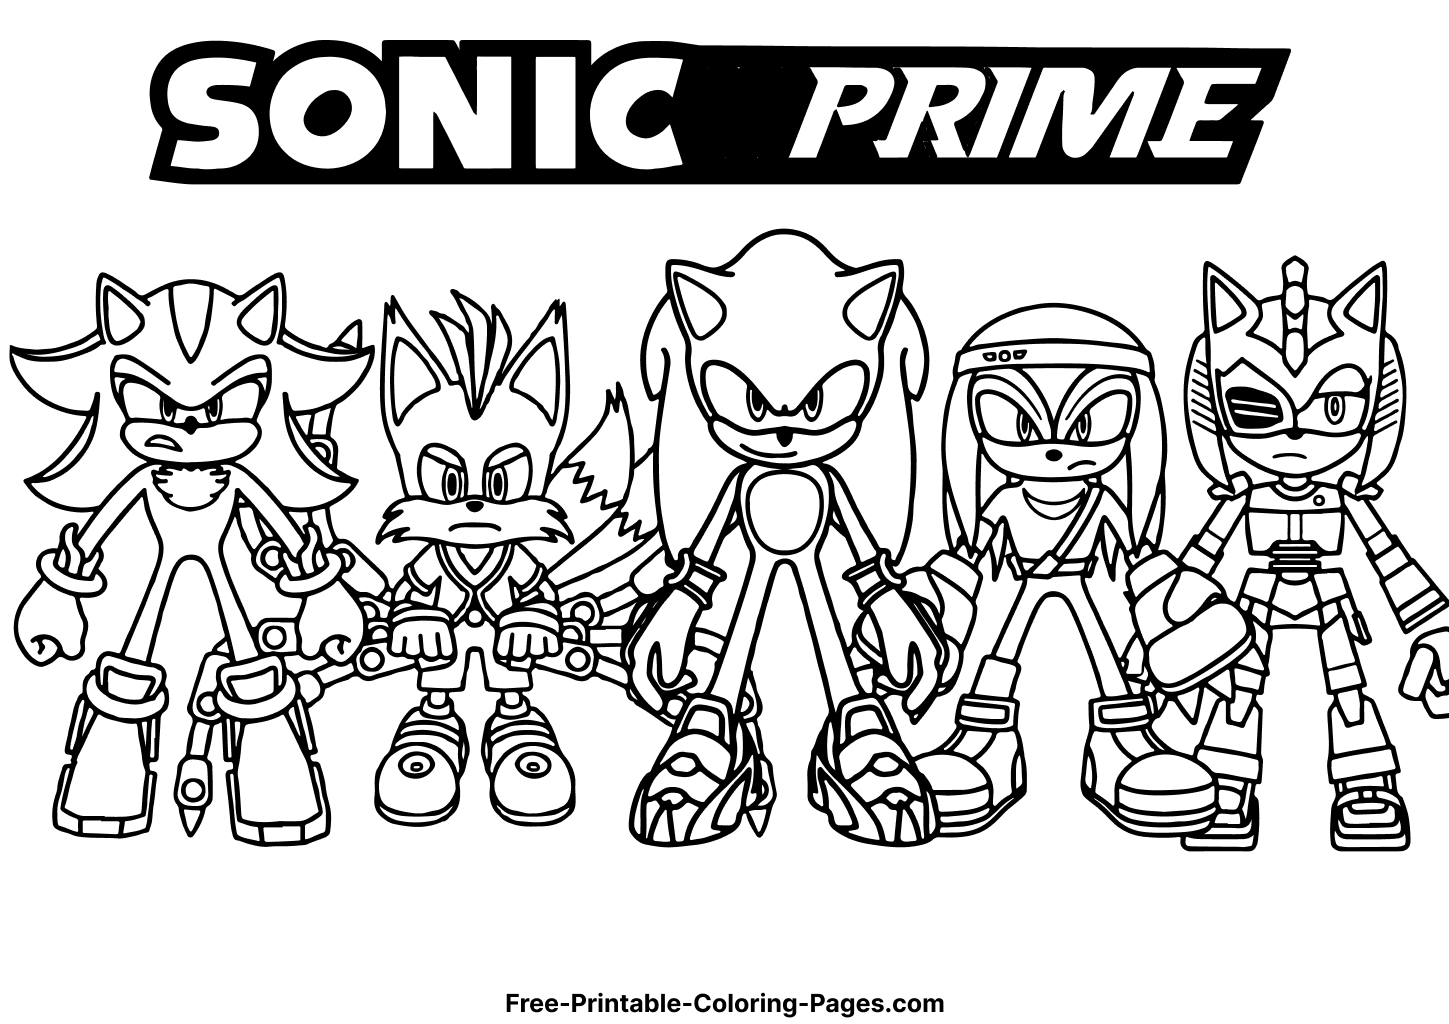 13 Free Printable Sonic Prime Coloring Pages